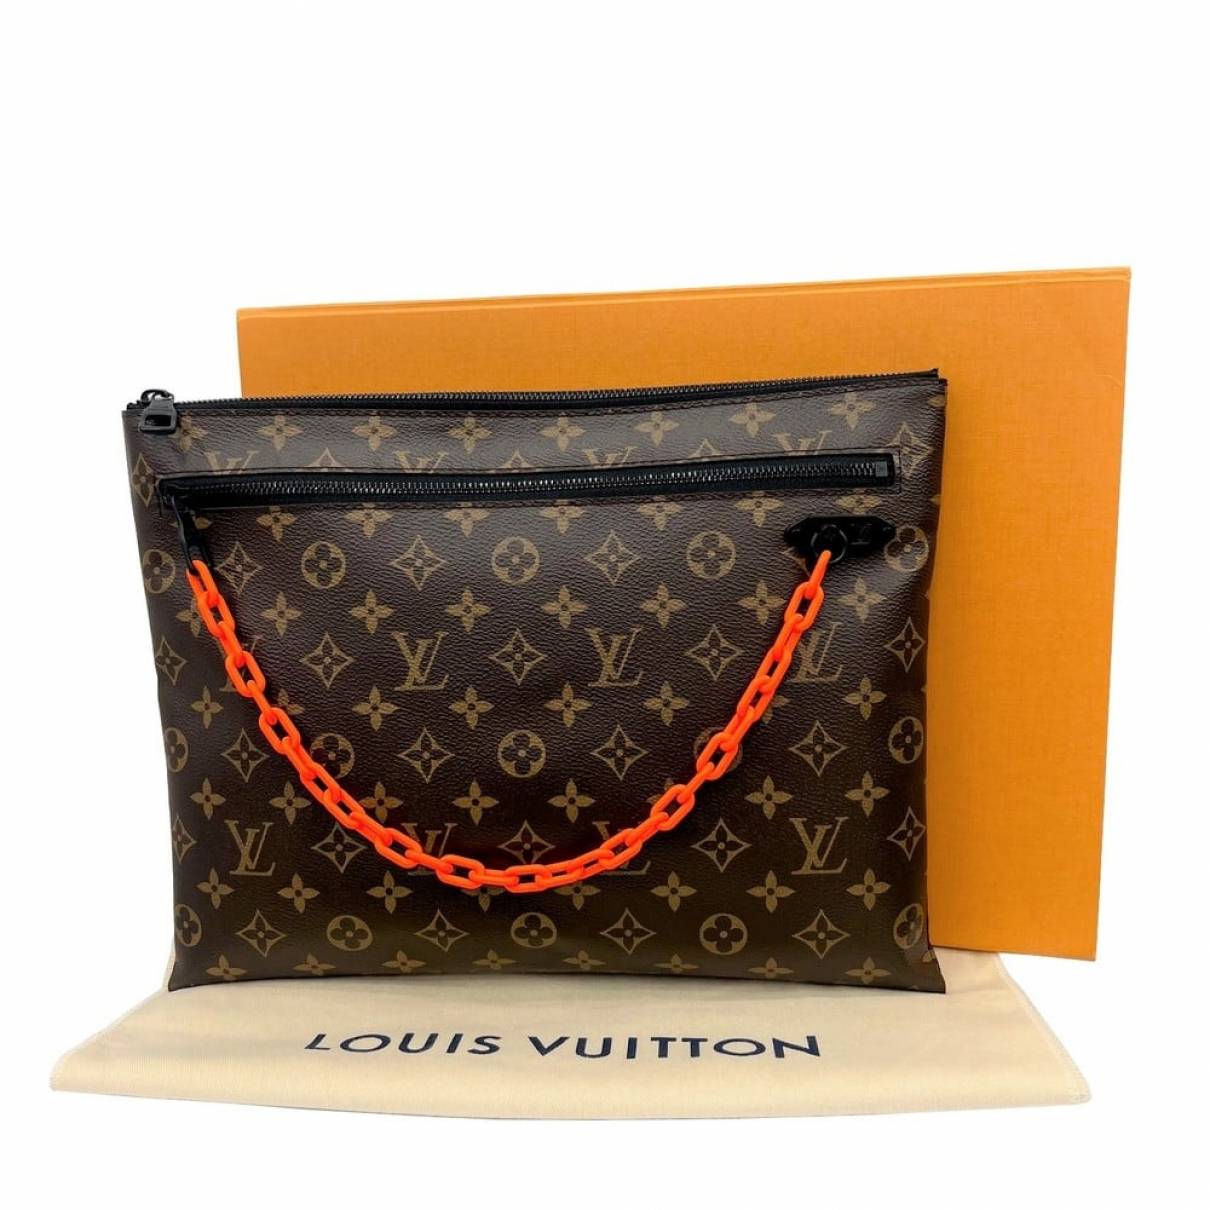 Louis Vuitton - Authenticated Pochette A4 Bag - Cloth Brown for Men, Very Good Condition